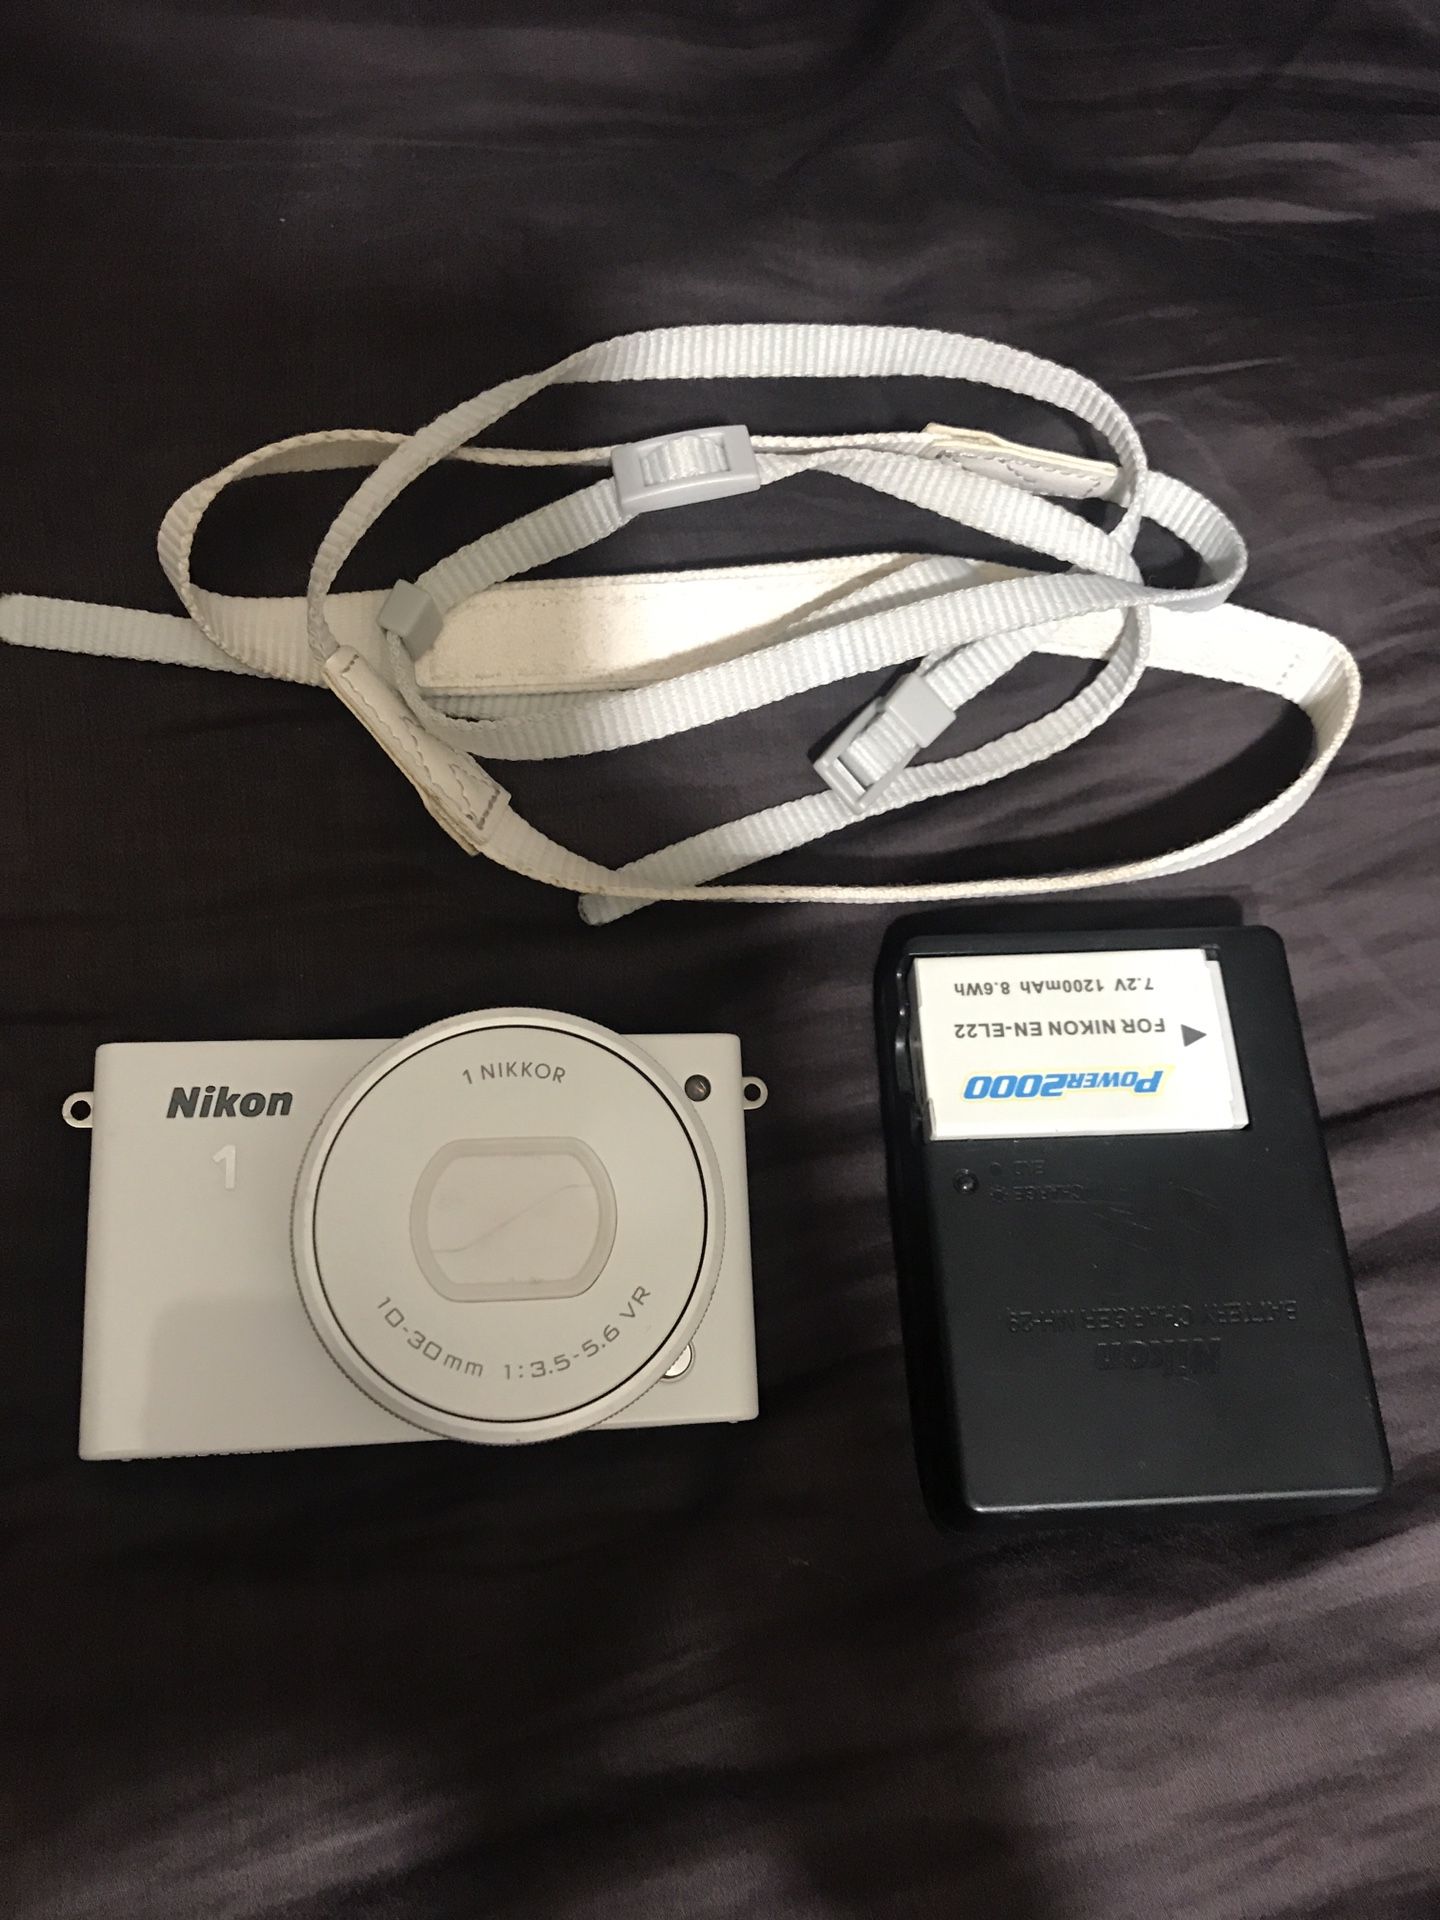 Nikon 1 J4 Digital Camera with extra Battery Charger and SD Card